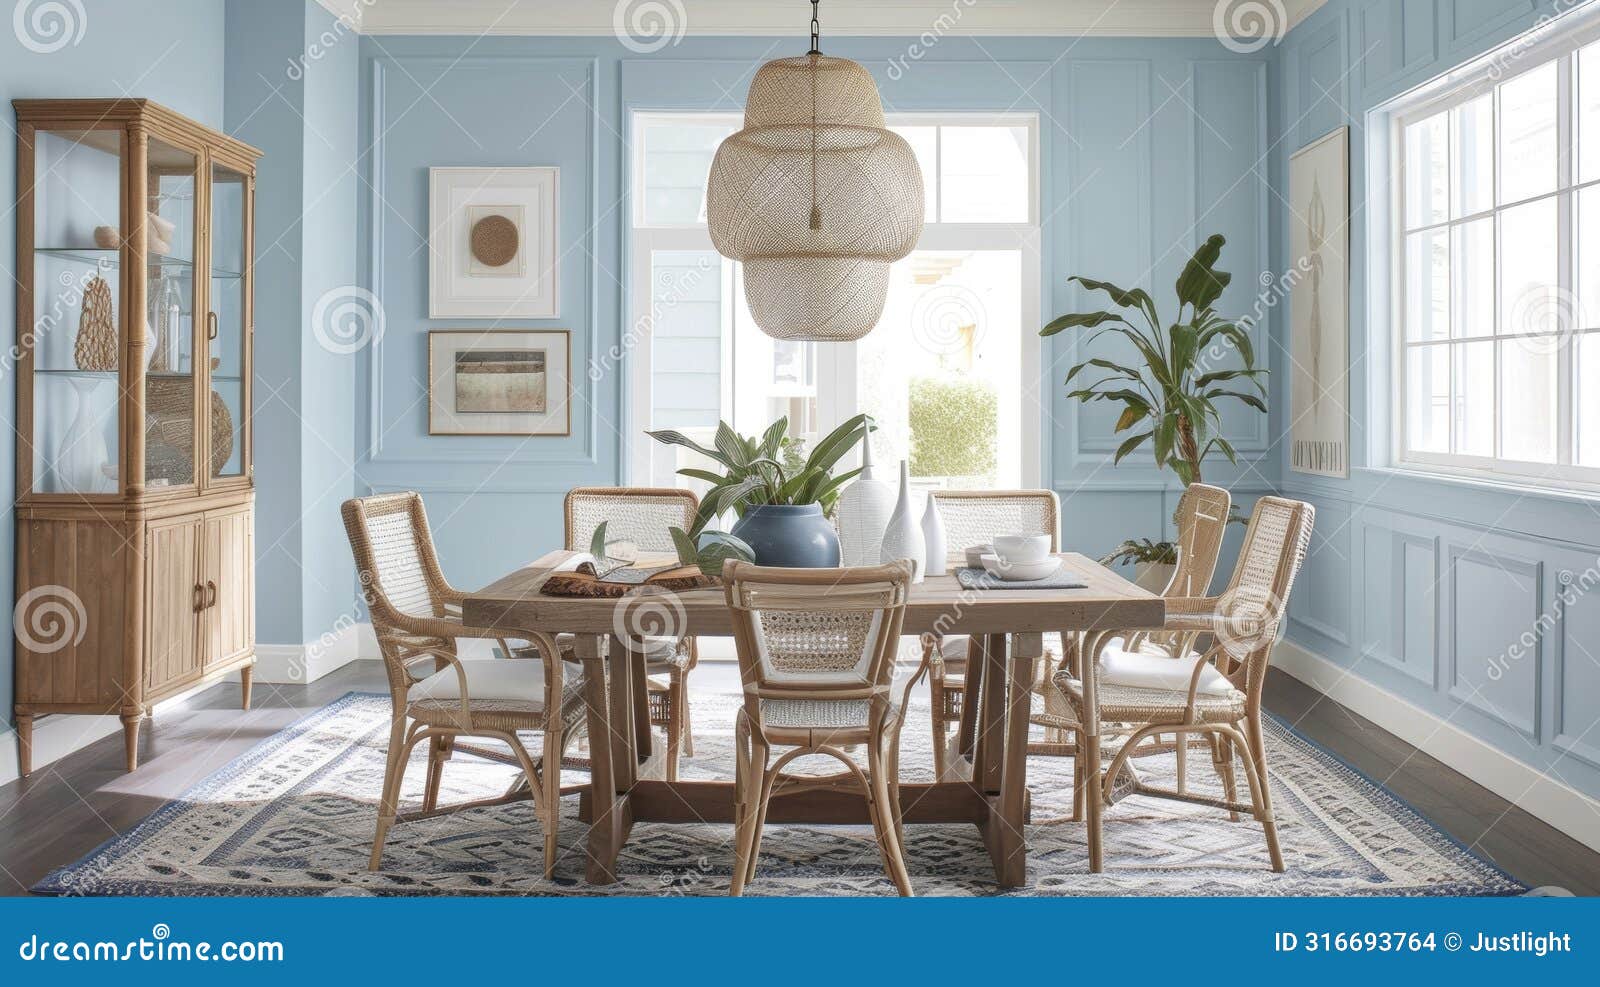 a family paints their dining room in a soothing blue hue instantly brightening up the space and creating a calming